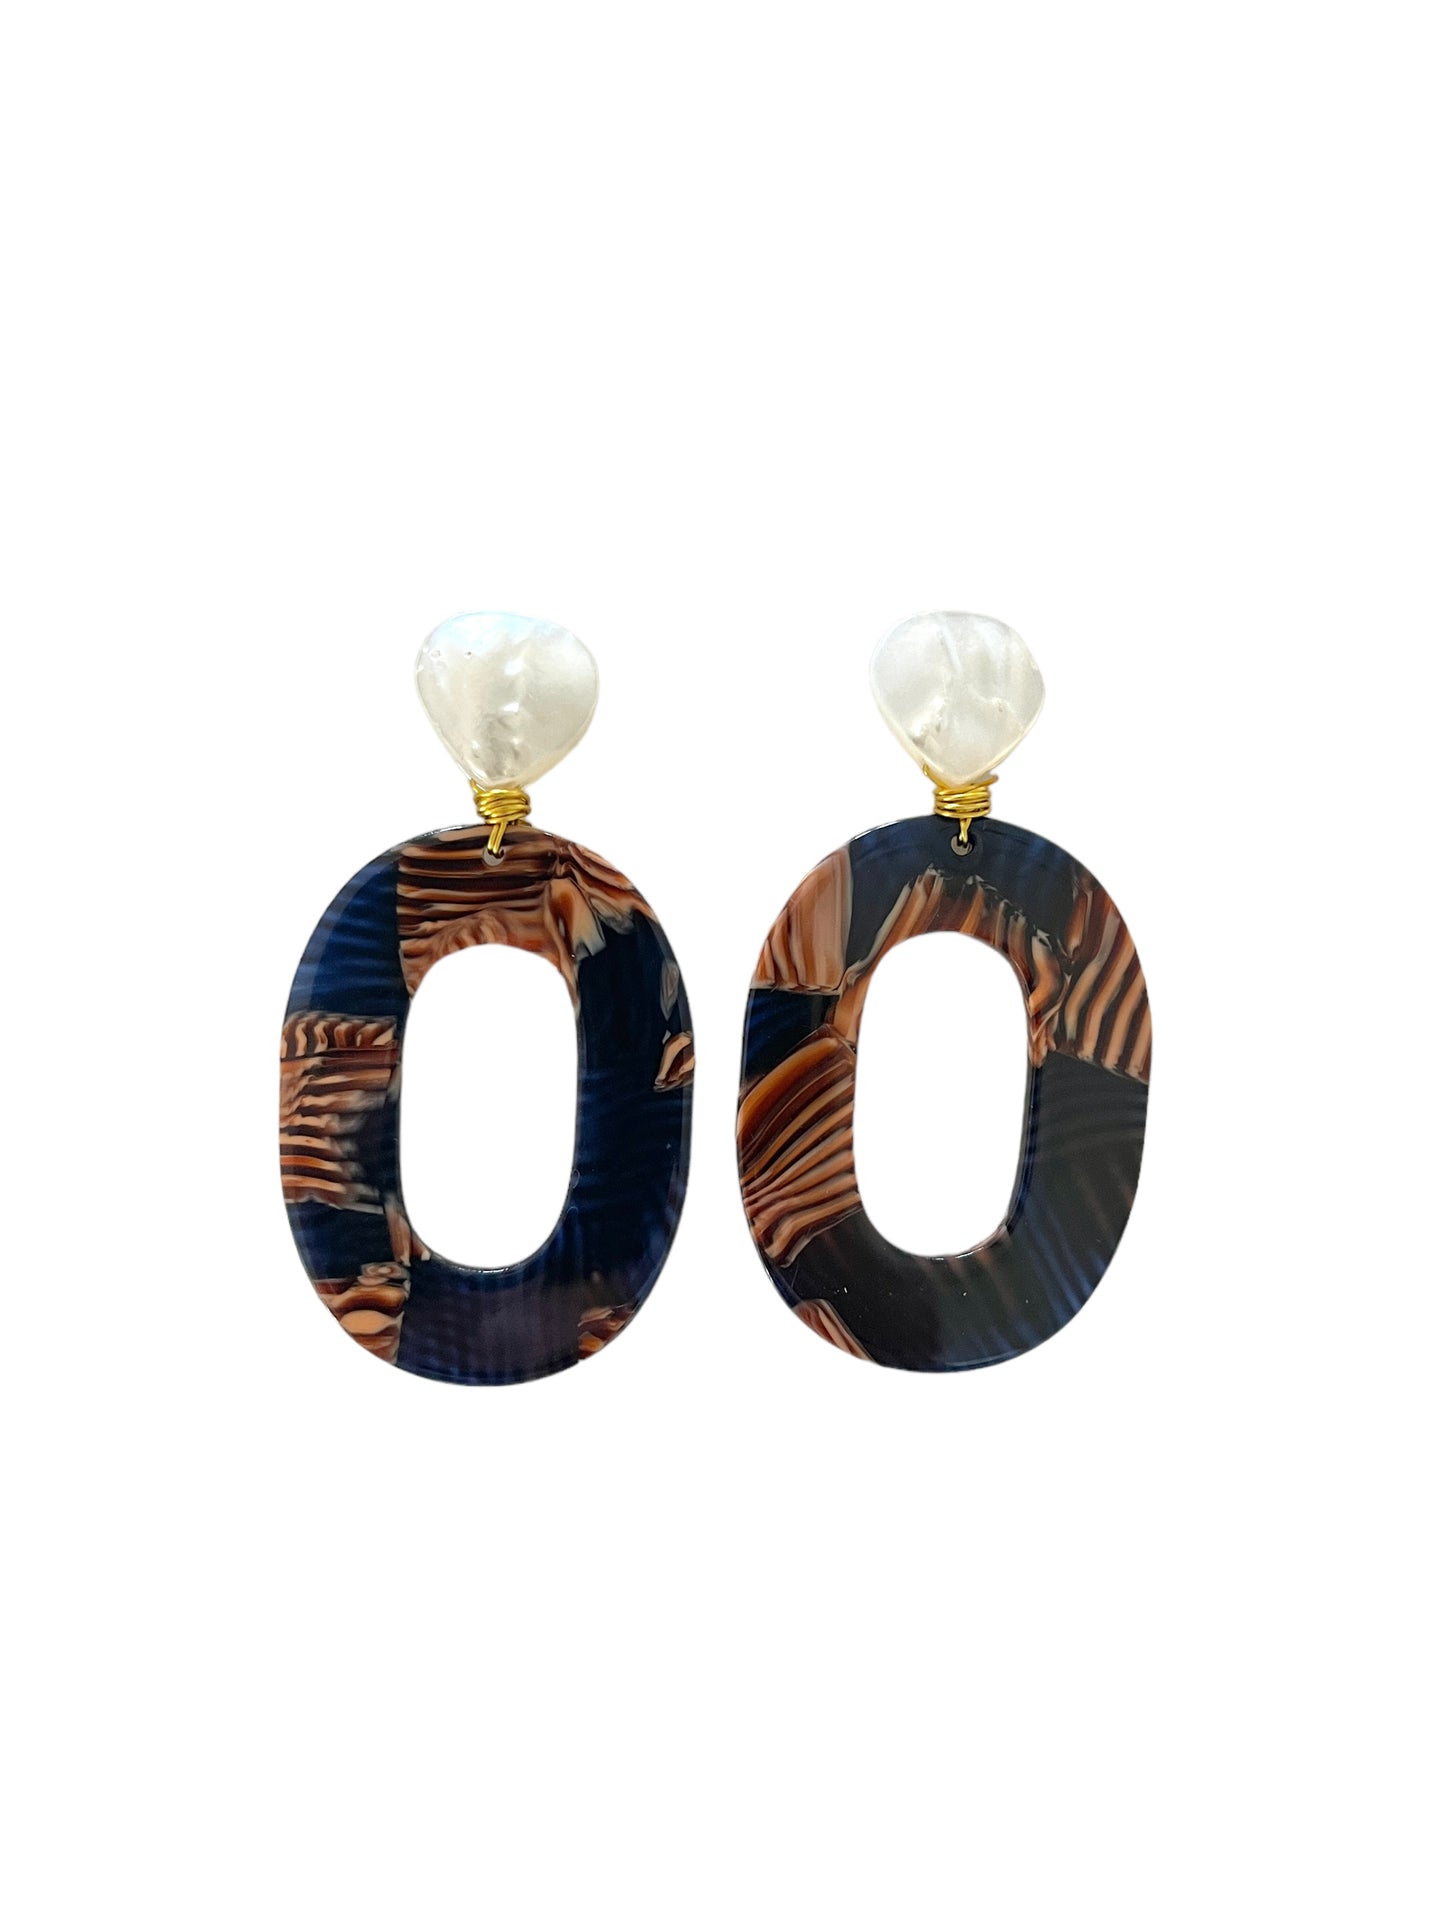 Oval Earrings - Navy and Brown